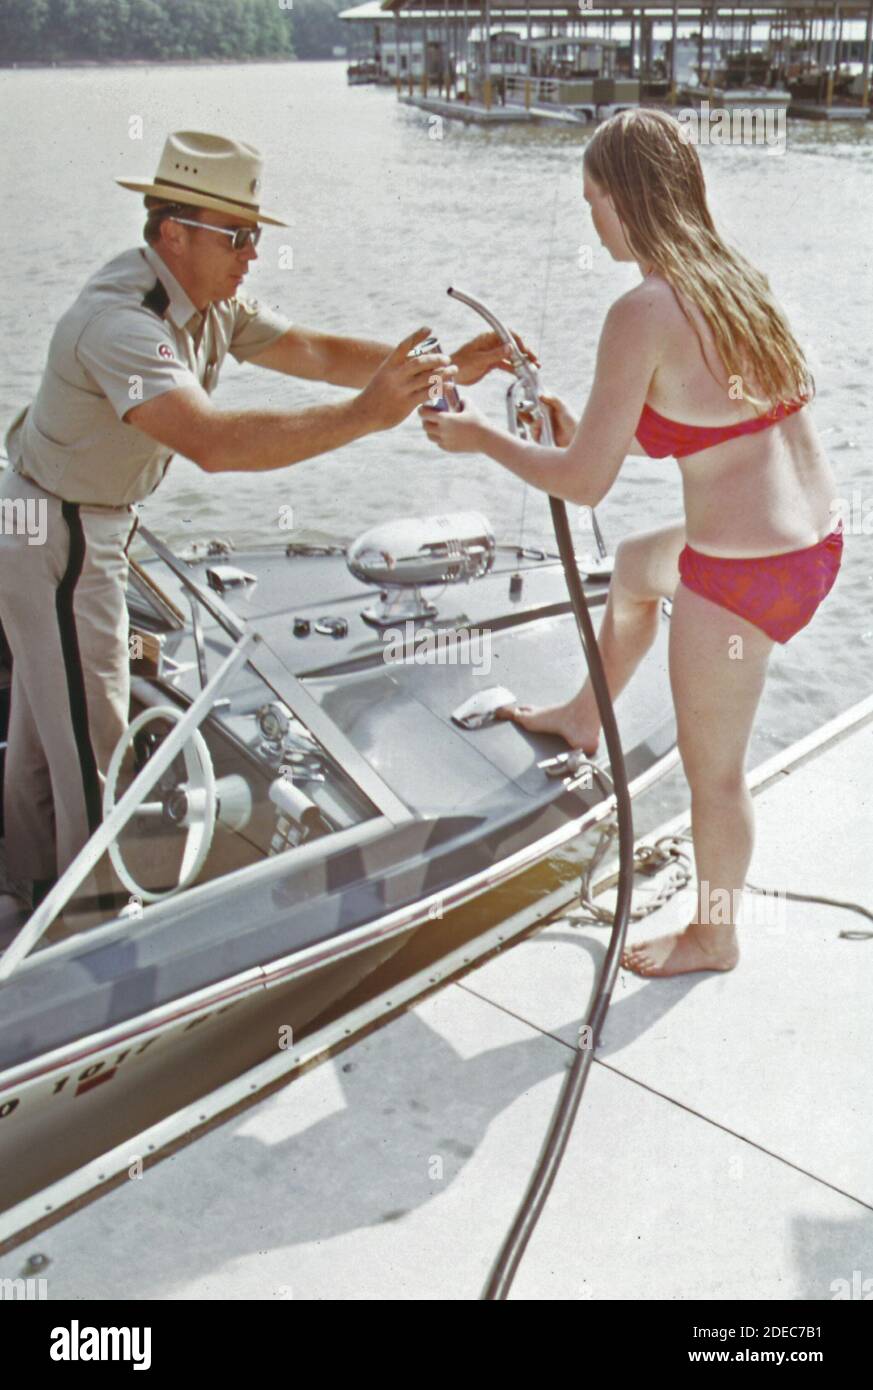 1970s Photos (1973) -  Water patrol supervisor dan needham stops to refuel at Bikini Beach; a floating service station with a self-explanatory name. Attendant is jill phillips; a college student working summers  (Lake of the Ozarks Missouri area) Stock Photo